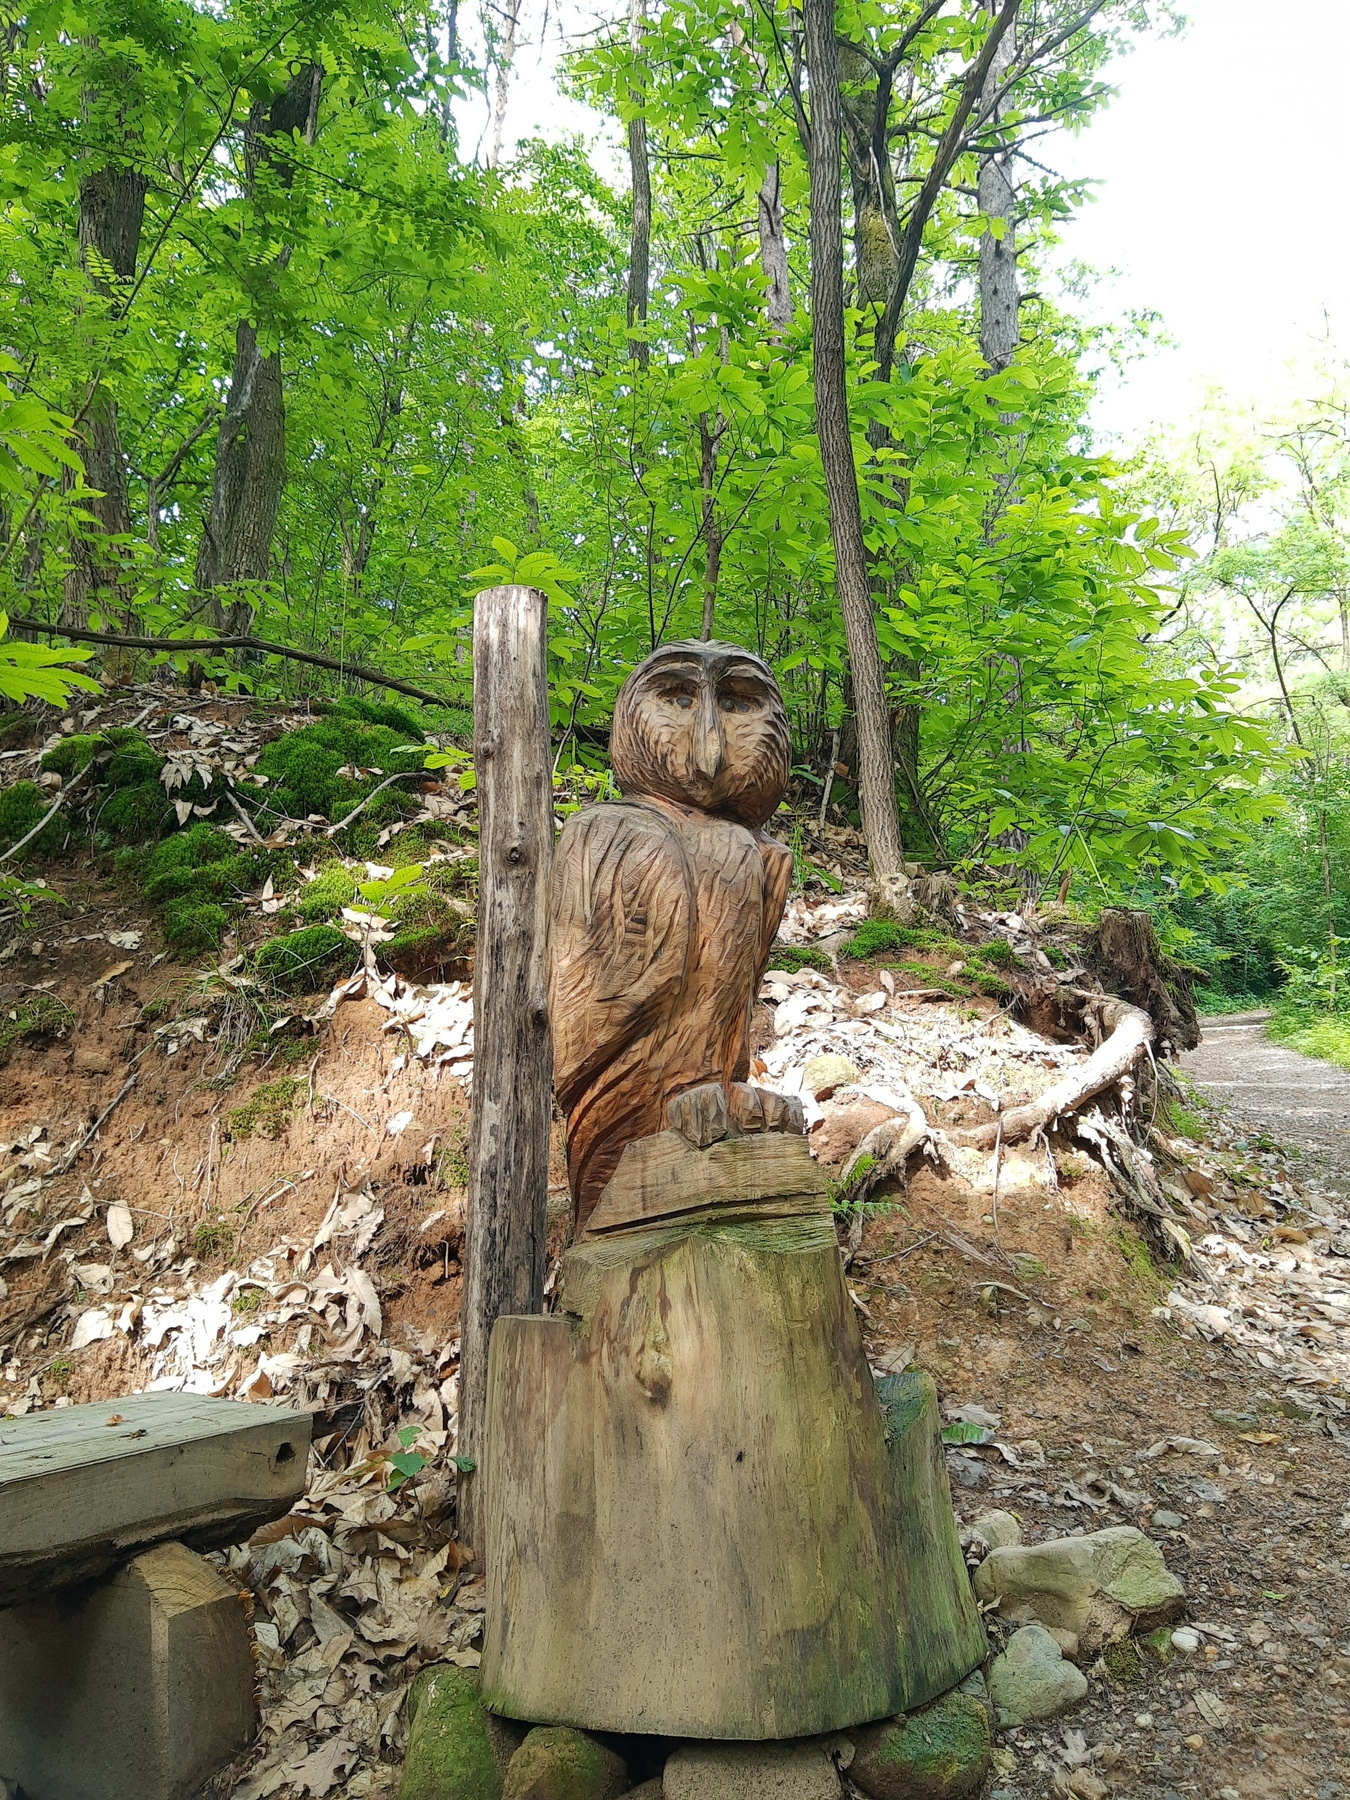 An owl made of wood